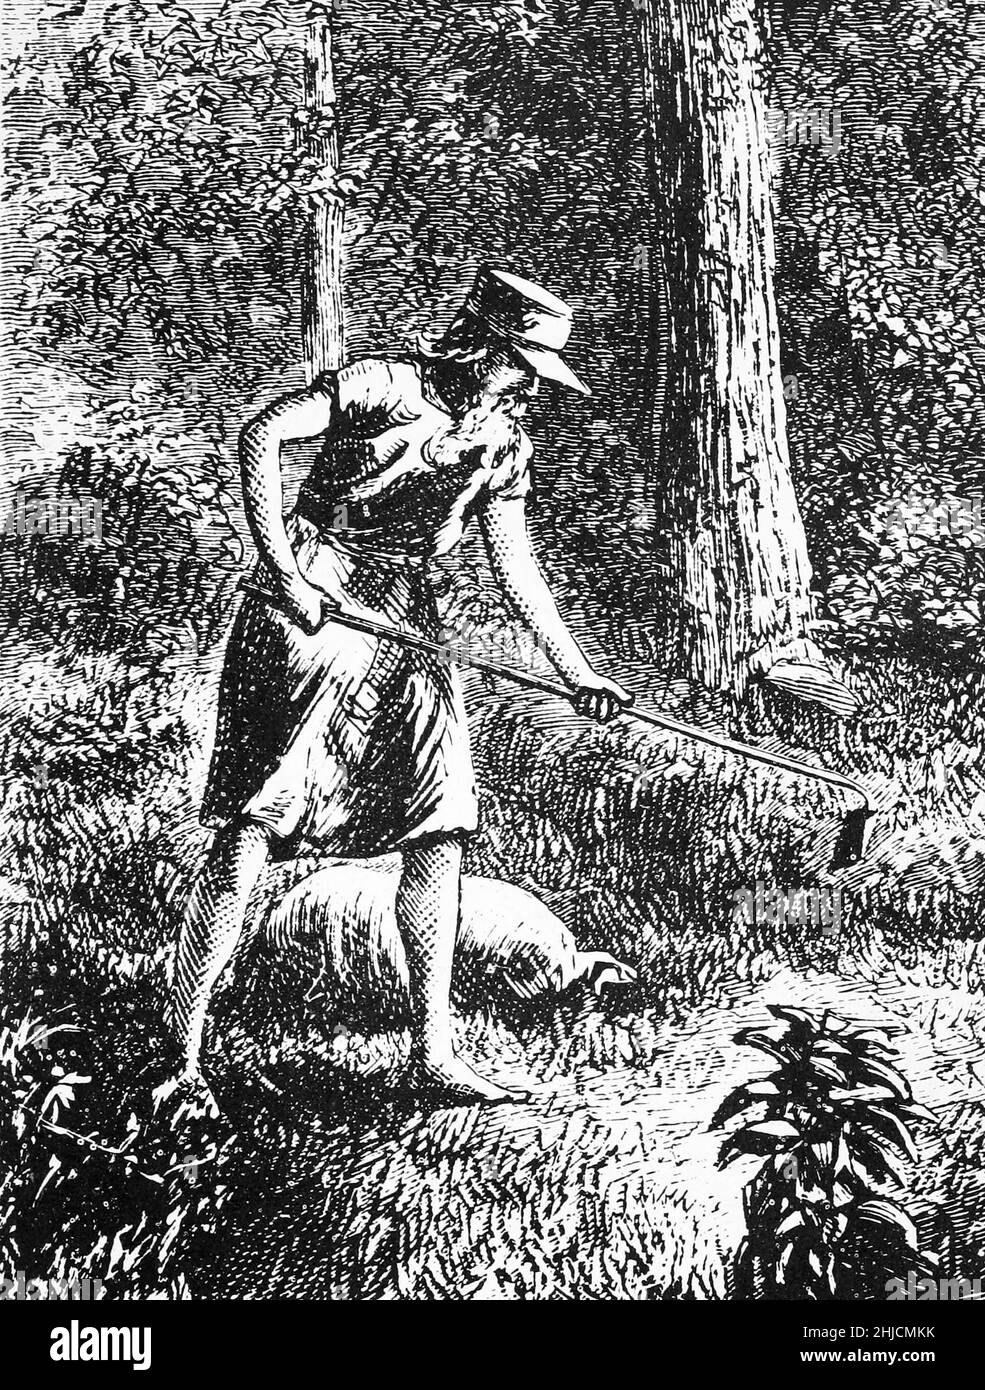 An etching of Johnny Appleseed, from Harper's New Monthly Magazine, 1871. John Chapman (1774-1845), better known as Johnny Appleseed, was an American pioneer nurseryman who introduced apple trees to large parts of Pennsylvania, Ohio, Indiana, Illinois and Ontario, as well as the northern counties of present-day West Virginia. He became an American legend with his tree-planting activities. Stock Photo